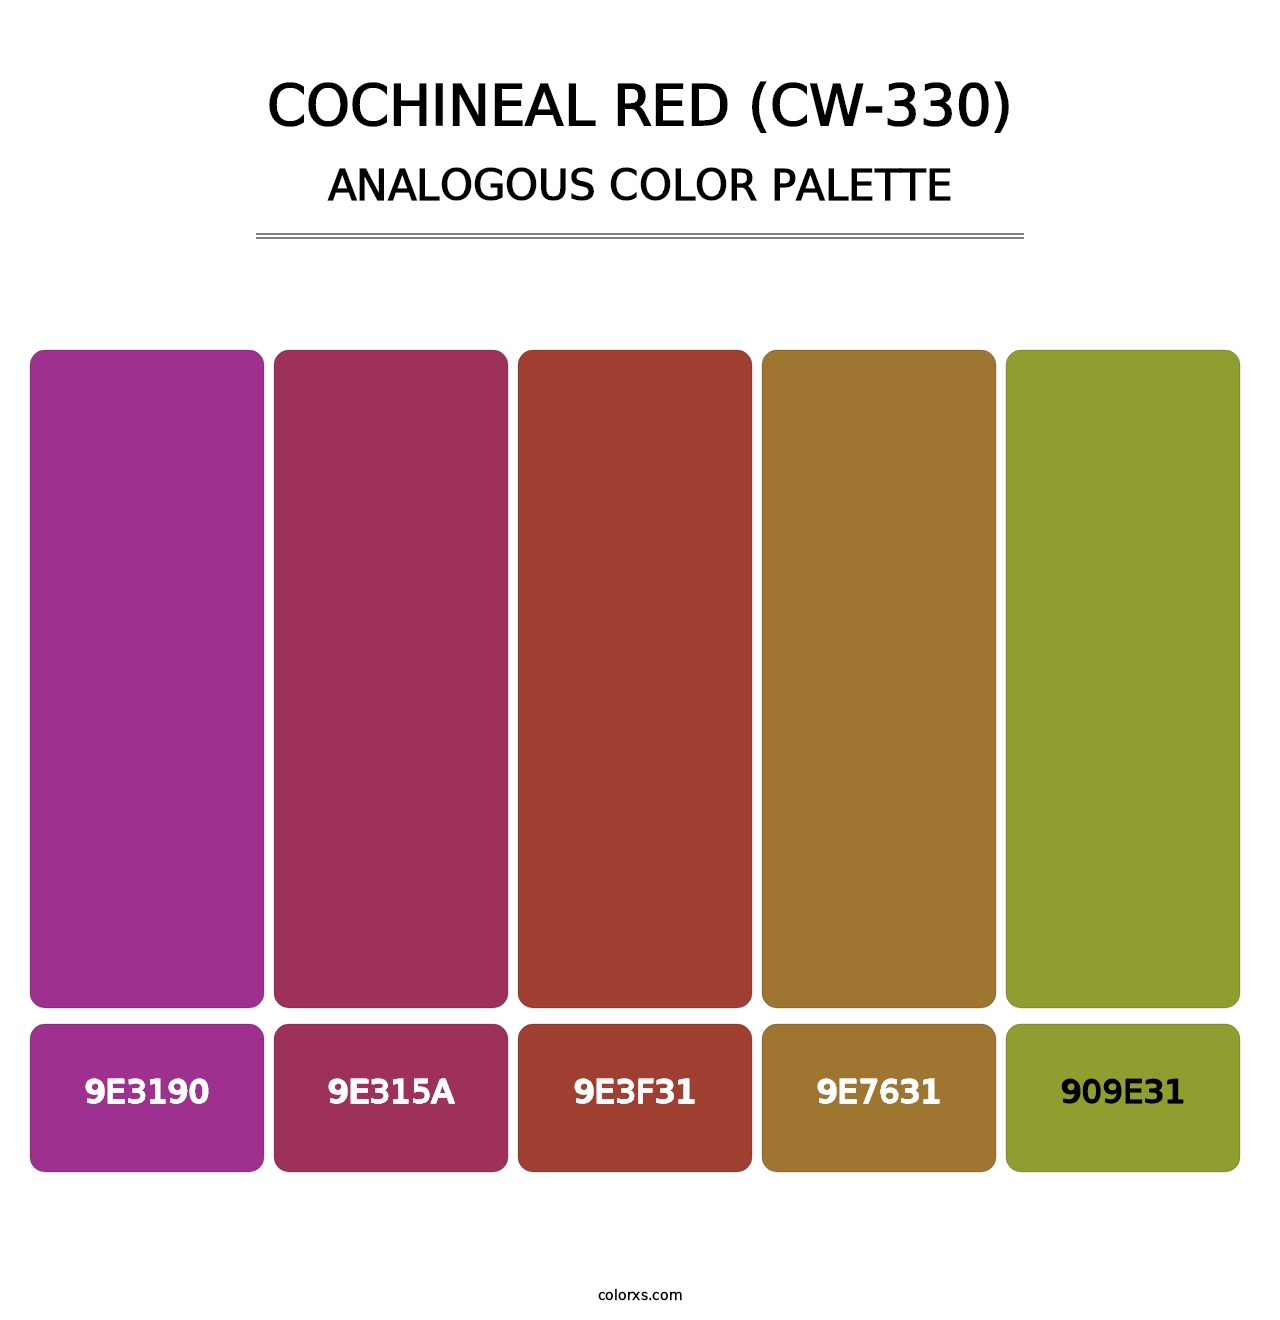 Cochineal Red (CW-330) - Analogous Color Palette